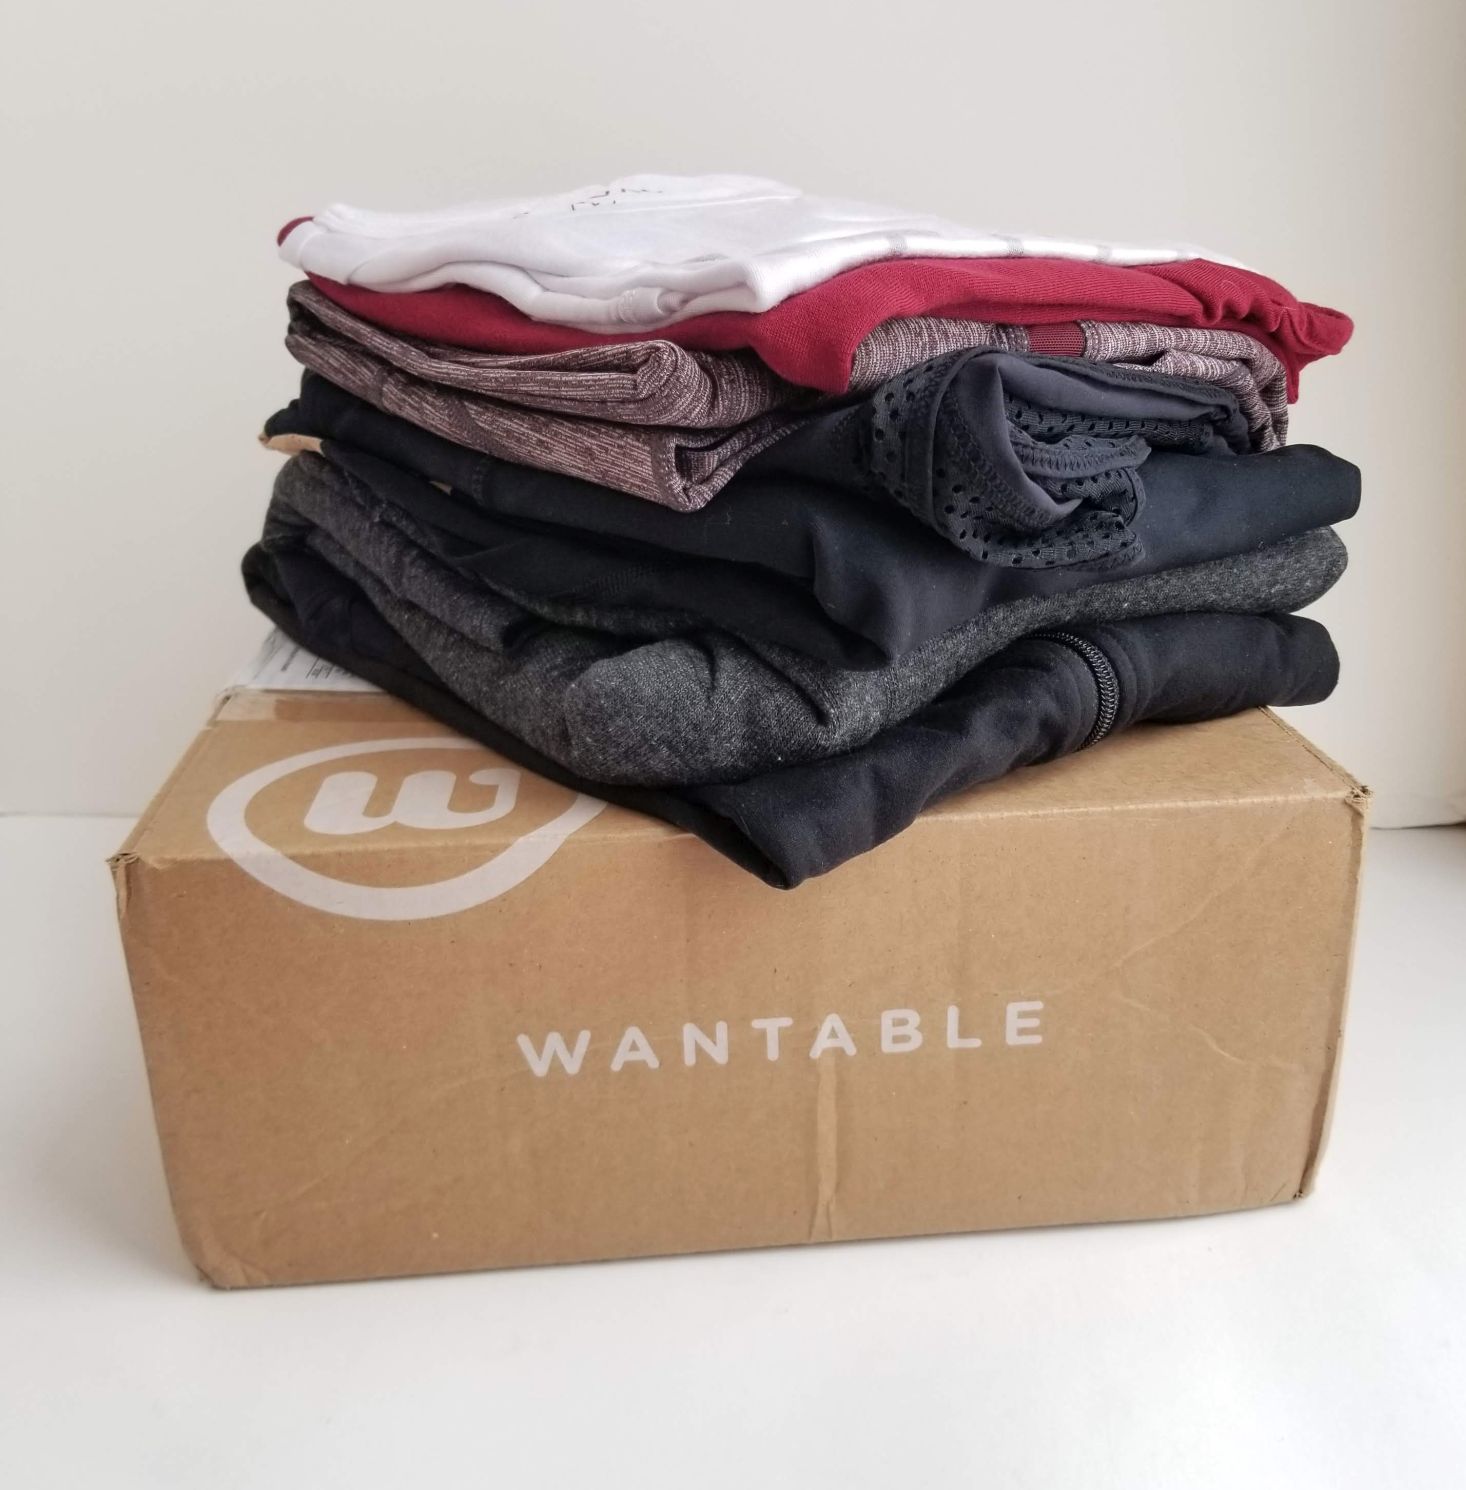 Wantable Fitness Subscription Box Review – March 2019